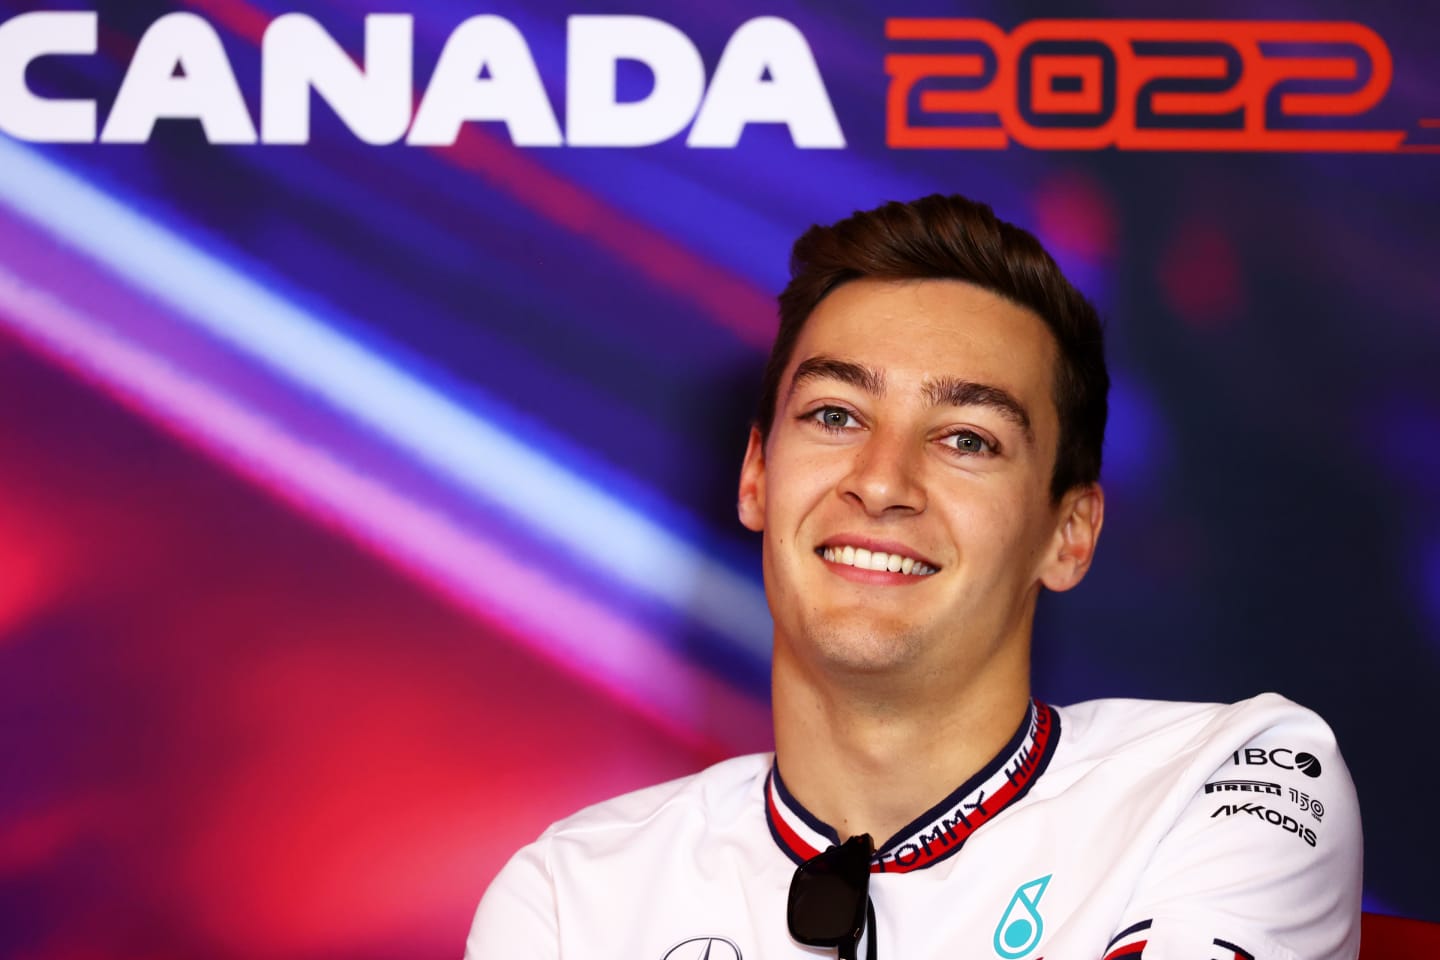 MONTREAL, QUEBEC - JUNE 17: George Russell of Great Britain and Mercedes looks on in the Drivers Press Conference prior to practice ahead of the F1 Grand Prix of Canada at Circuit Gilles Villeneuve on June 17, 2022 in Montreal, Quebec. (Photo by Dan Istitene/Getty Images)